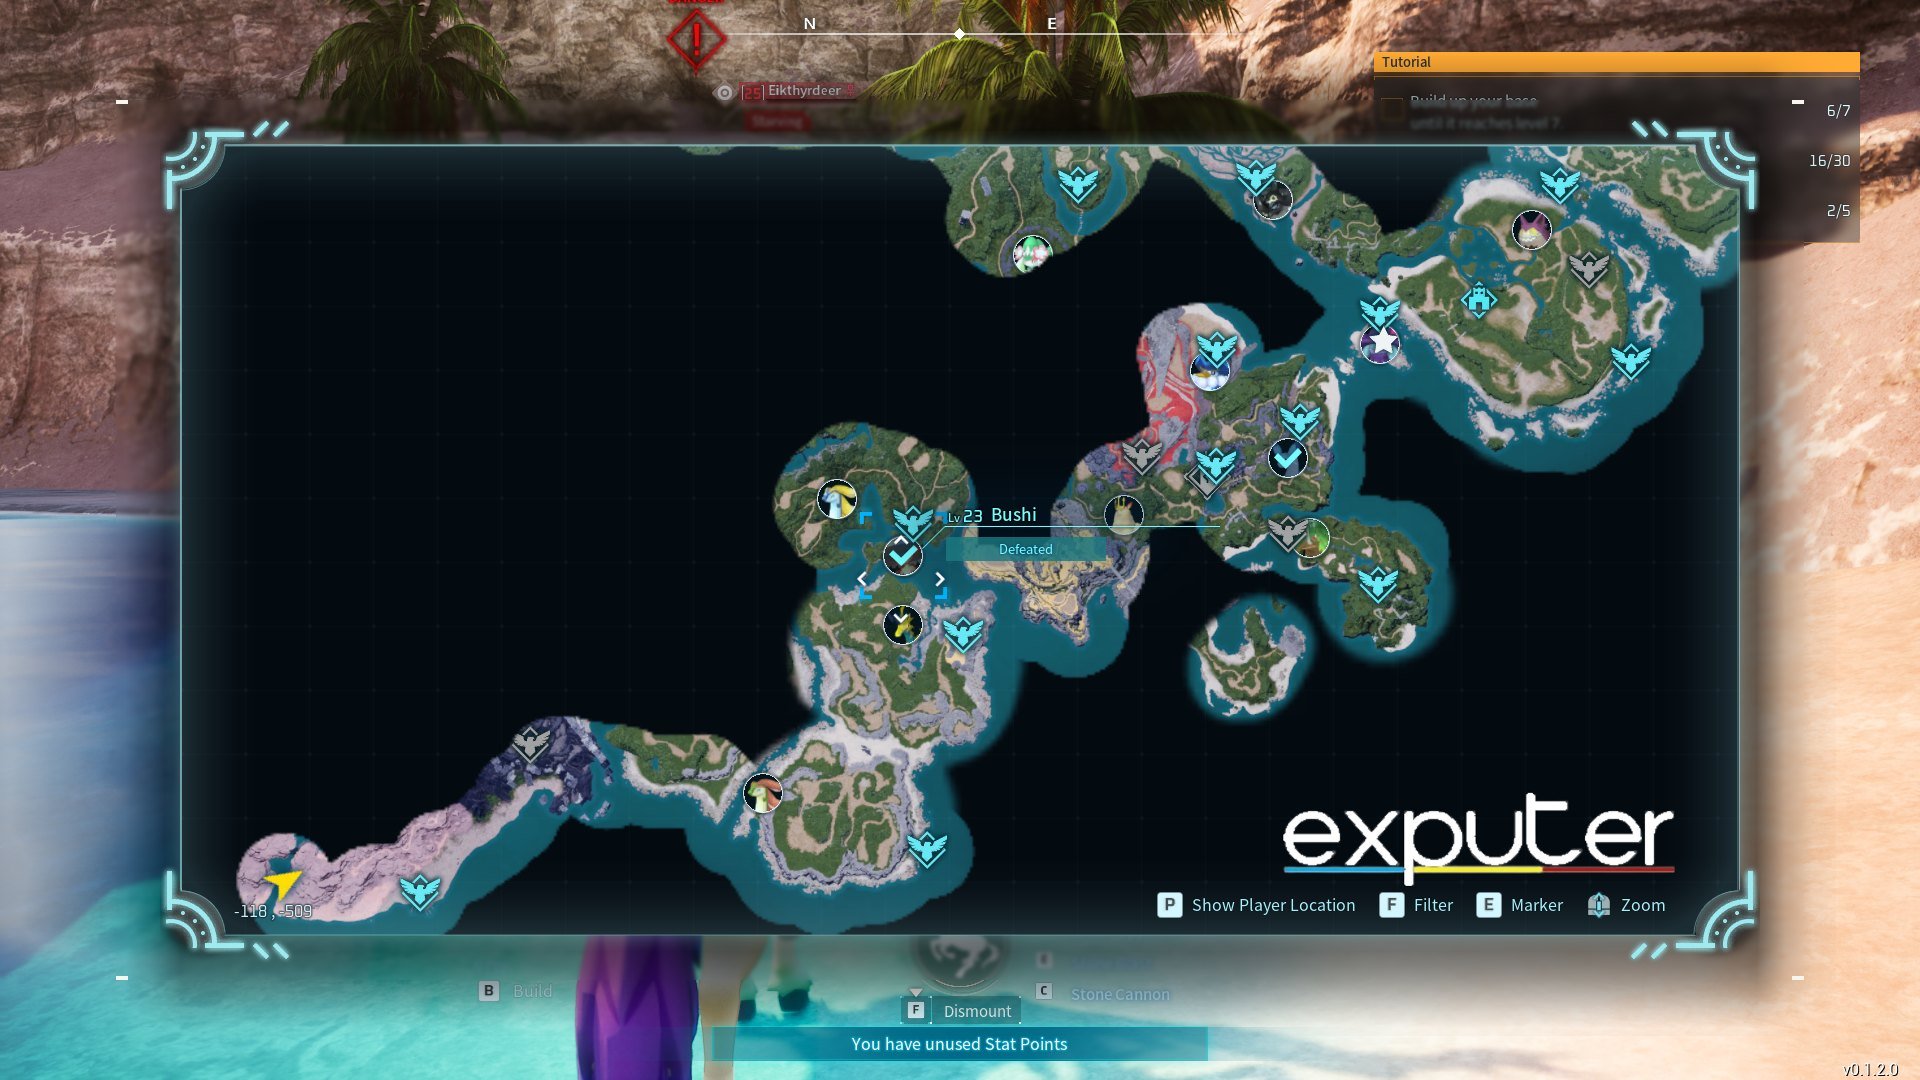 level 23 Alpha Bushi spawn location on map in Palworld. (image captured by eXputer) 